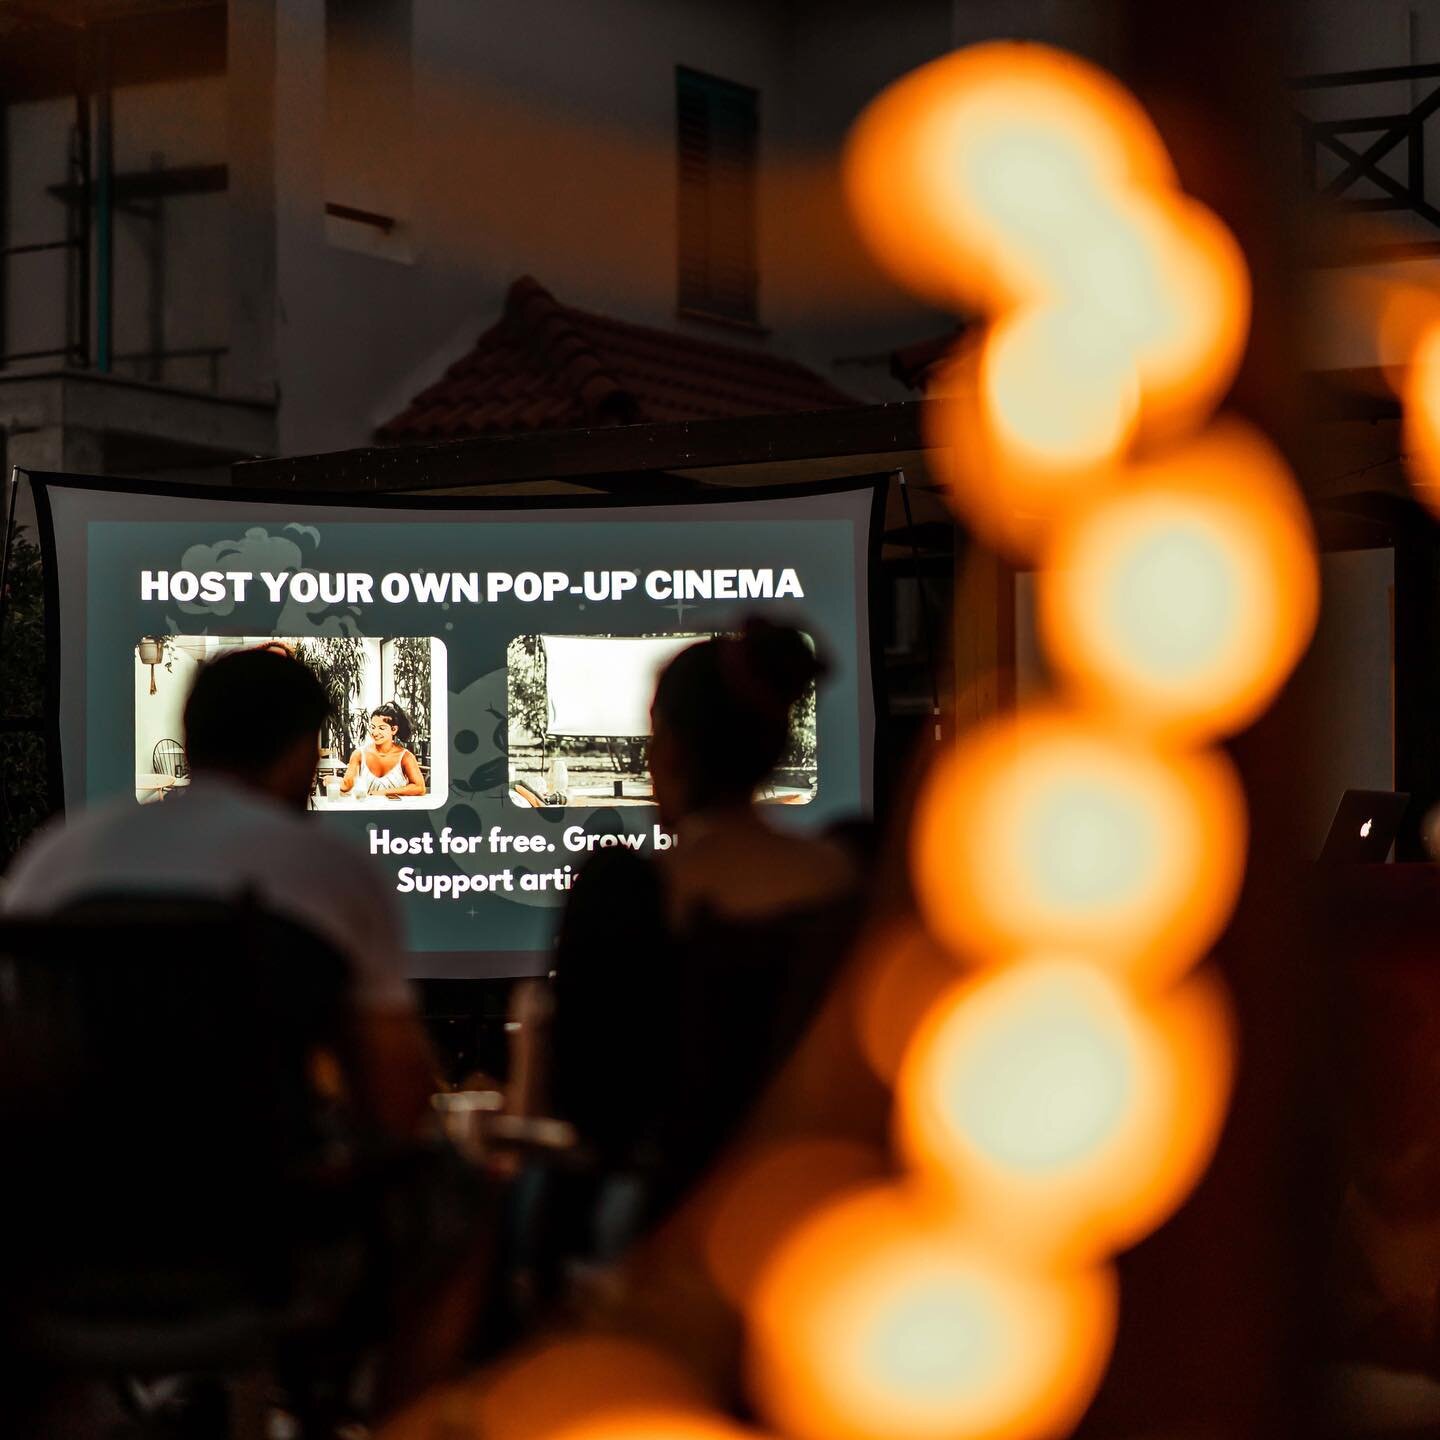 Every time a new Host signs up, the Cinebur team does a little jiggle-dance because cinema gets so much cooler💥

@Cinebur is the first moviegoing platform to put people first. Discover unique movie nights hosted by other users - our Hosts are the on